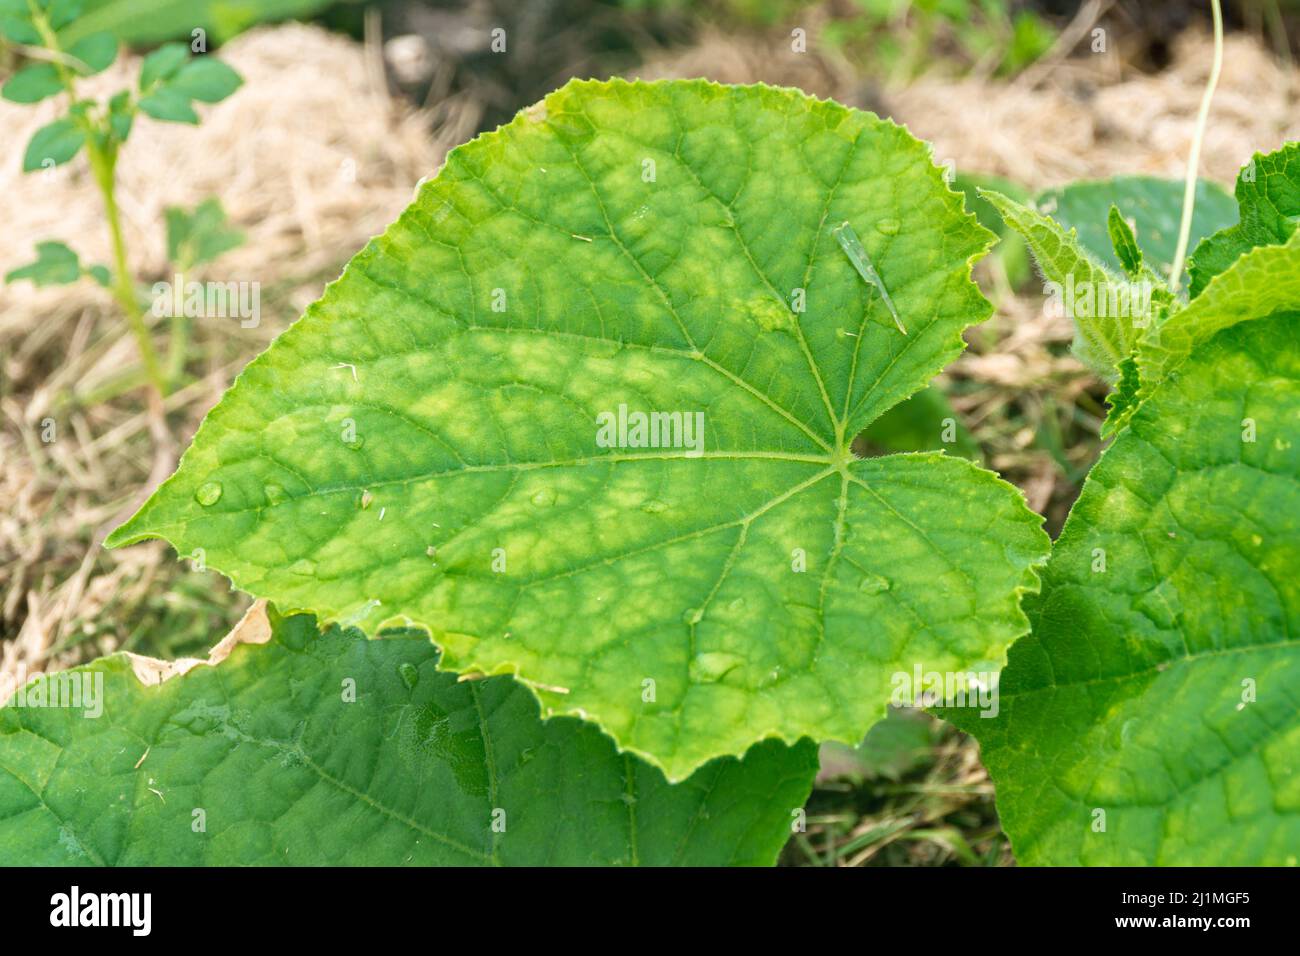 cucumber leaves begin to turn yellow from a lack of minerals during the fruiting period, selective focus Stock Photo